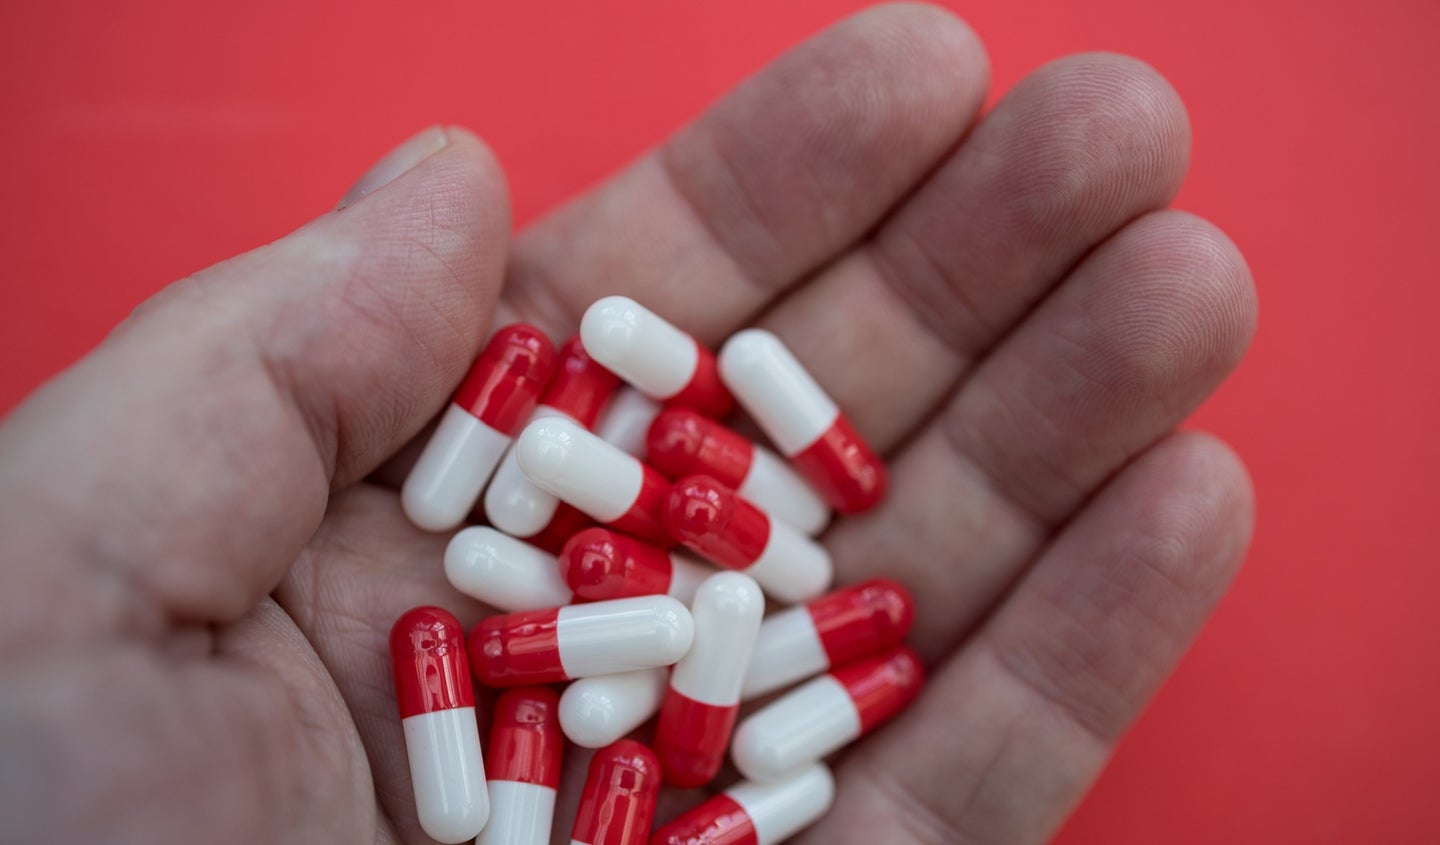 Red and white tianeptine antidepressant pills, which are unregulated by the FDA, on a hand on a red background